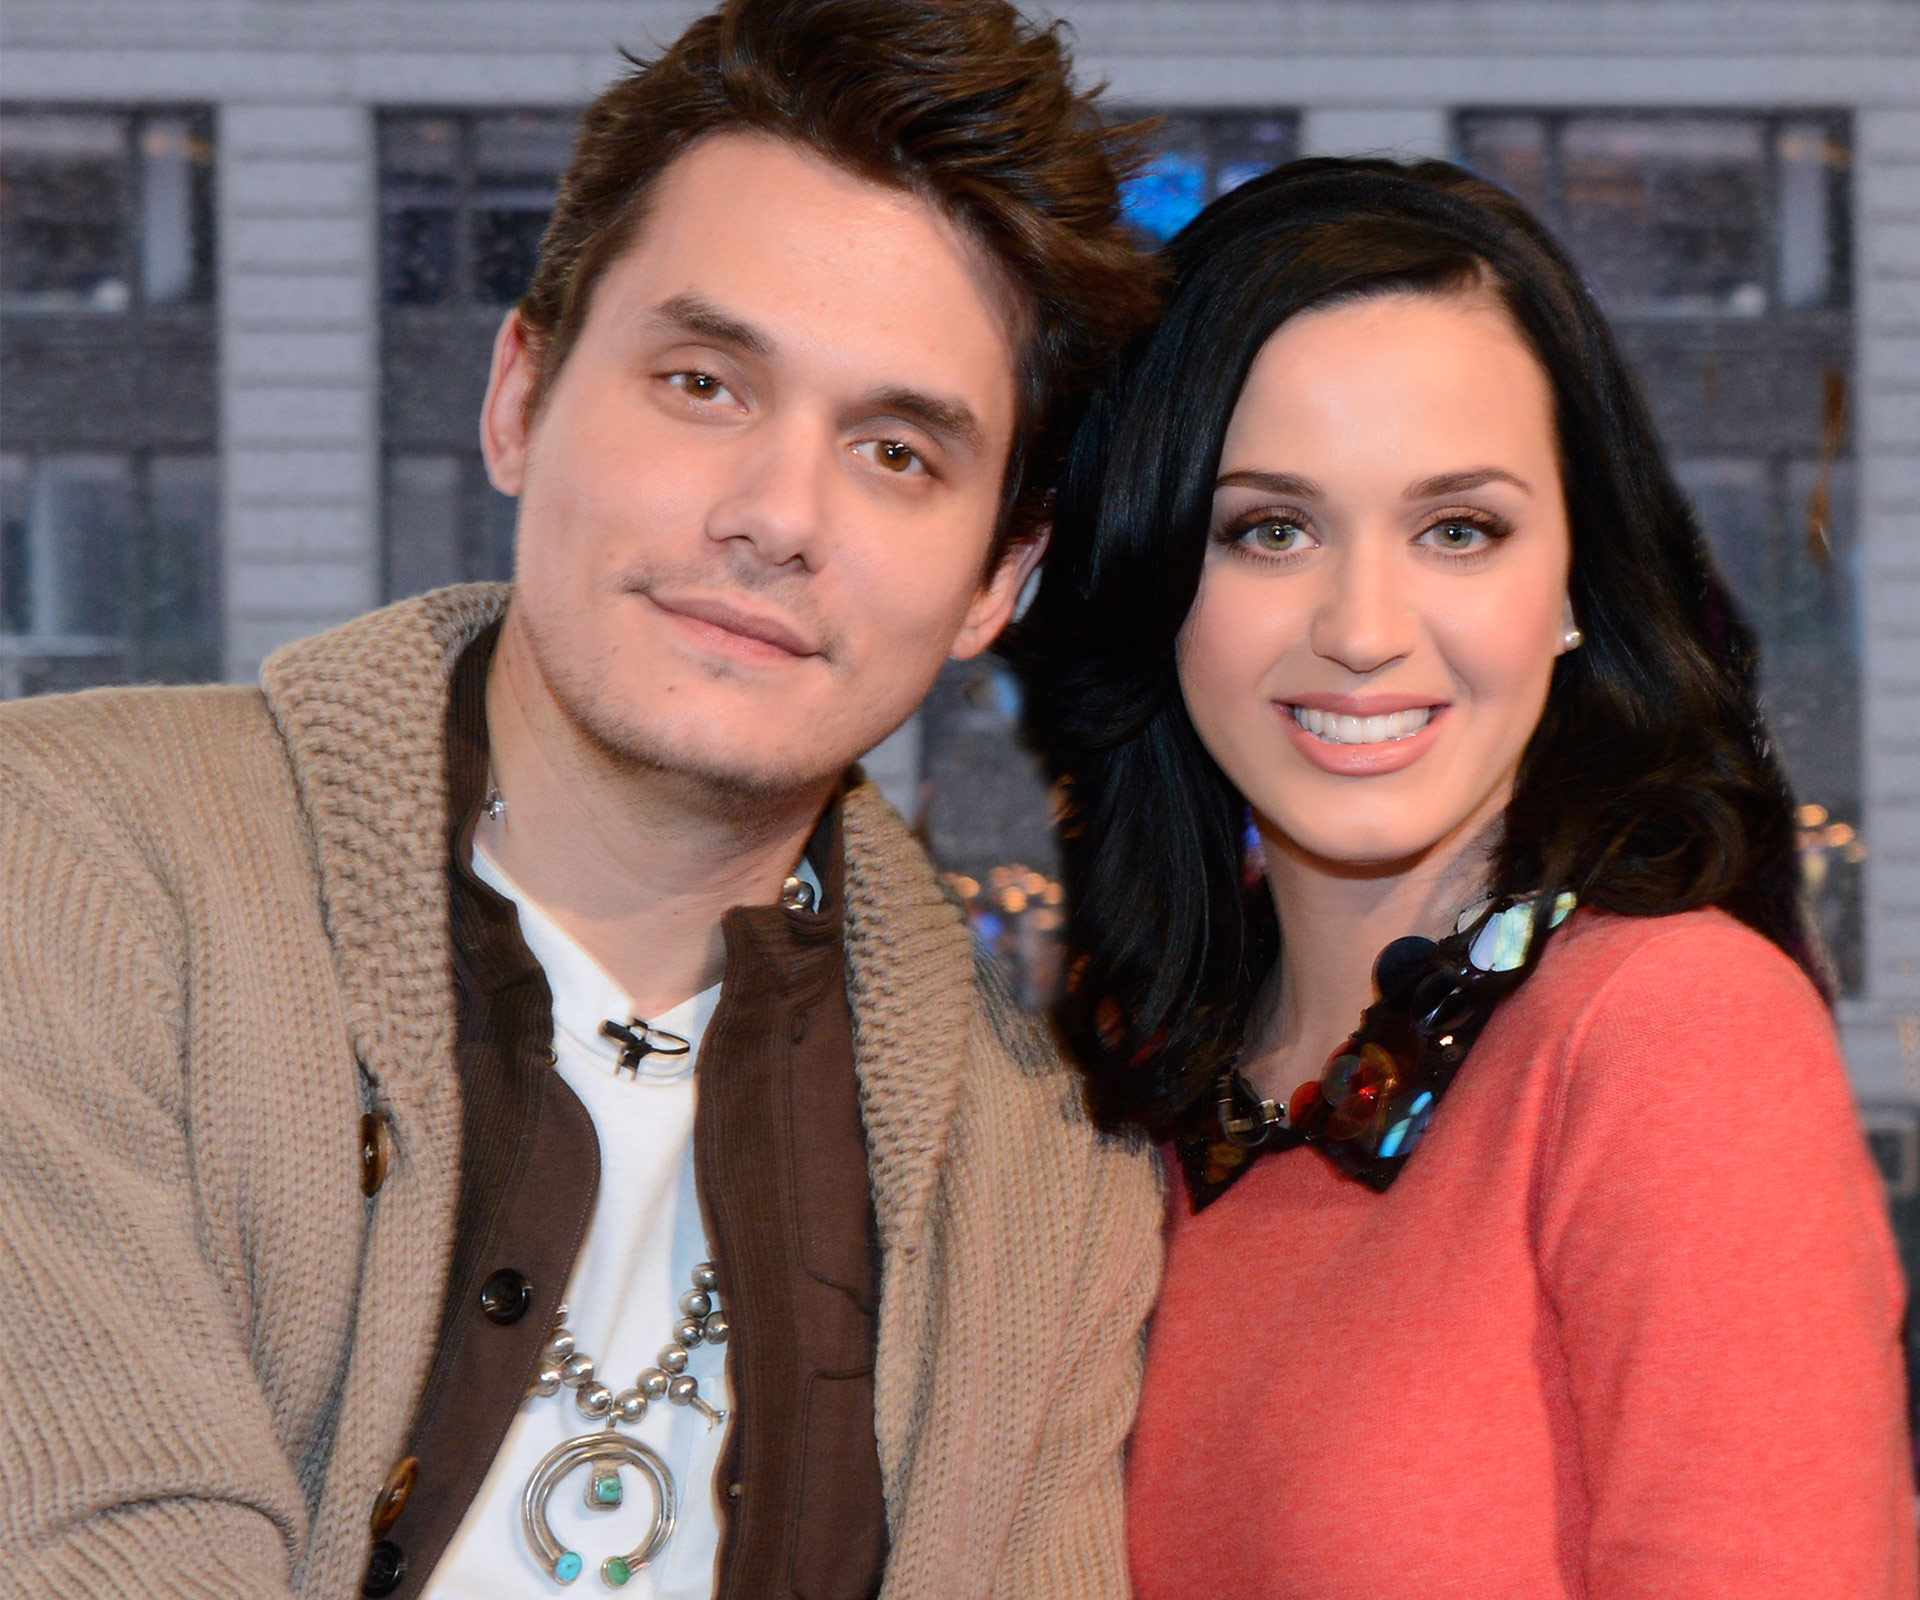 Is Katy Perry back with John Mayer?